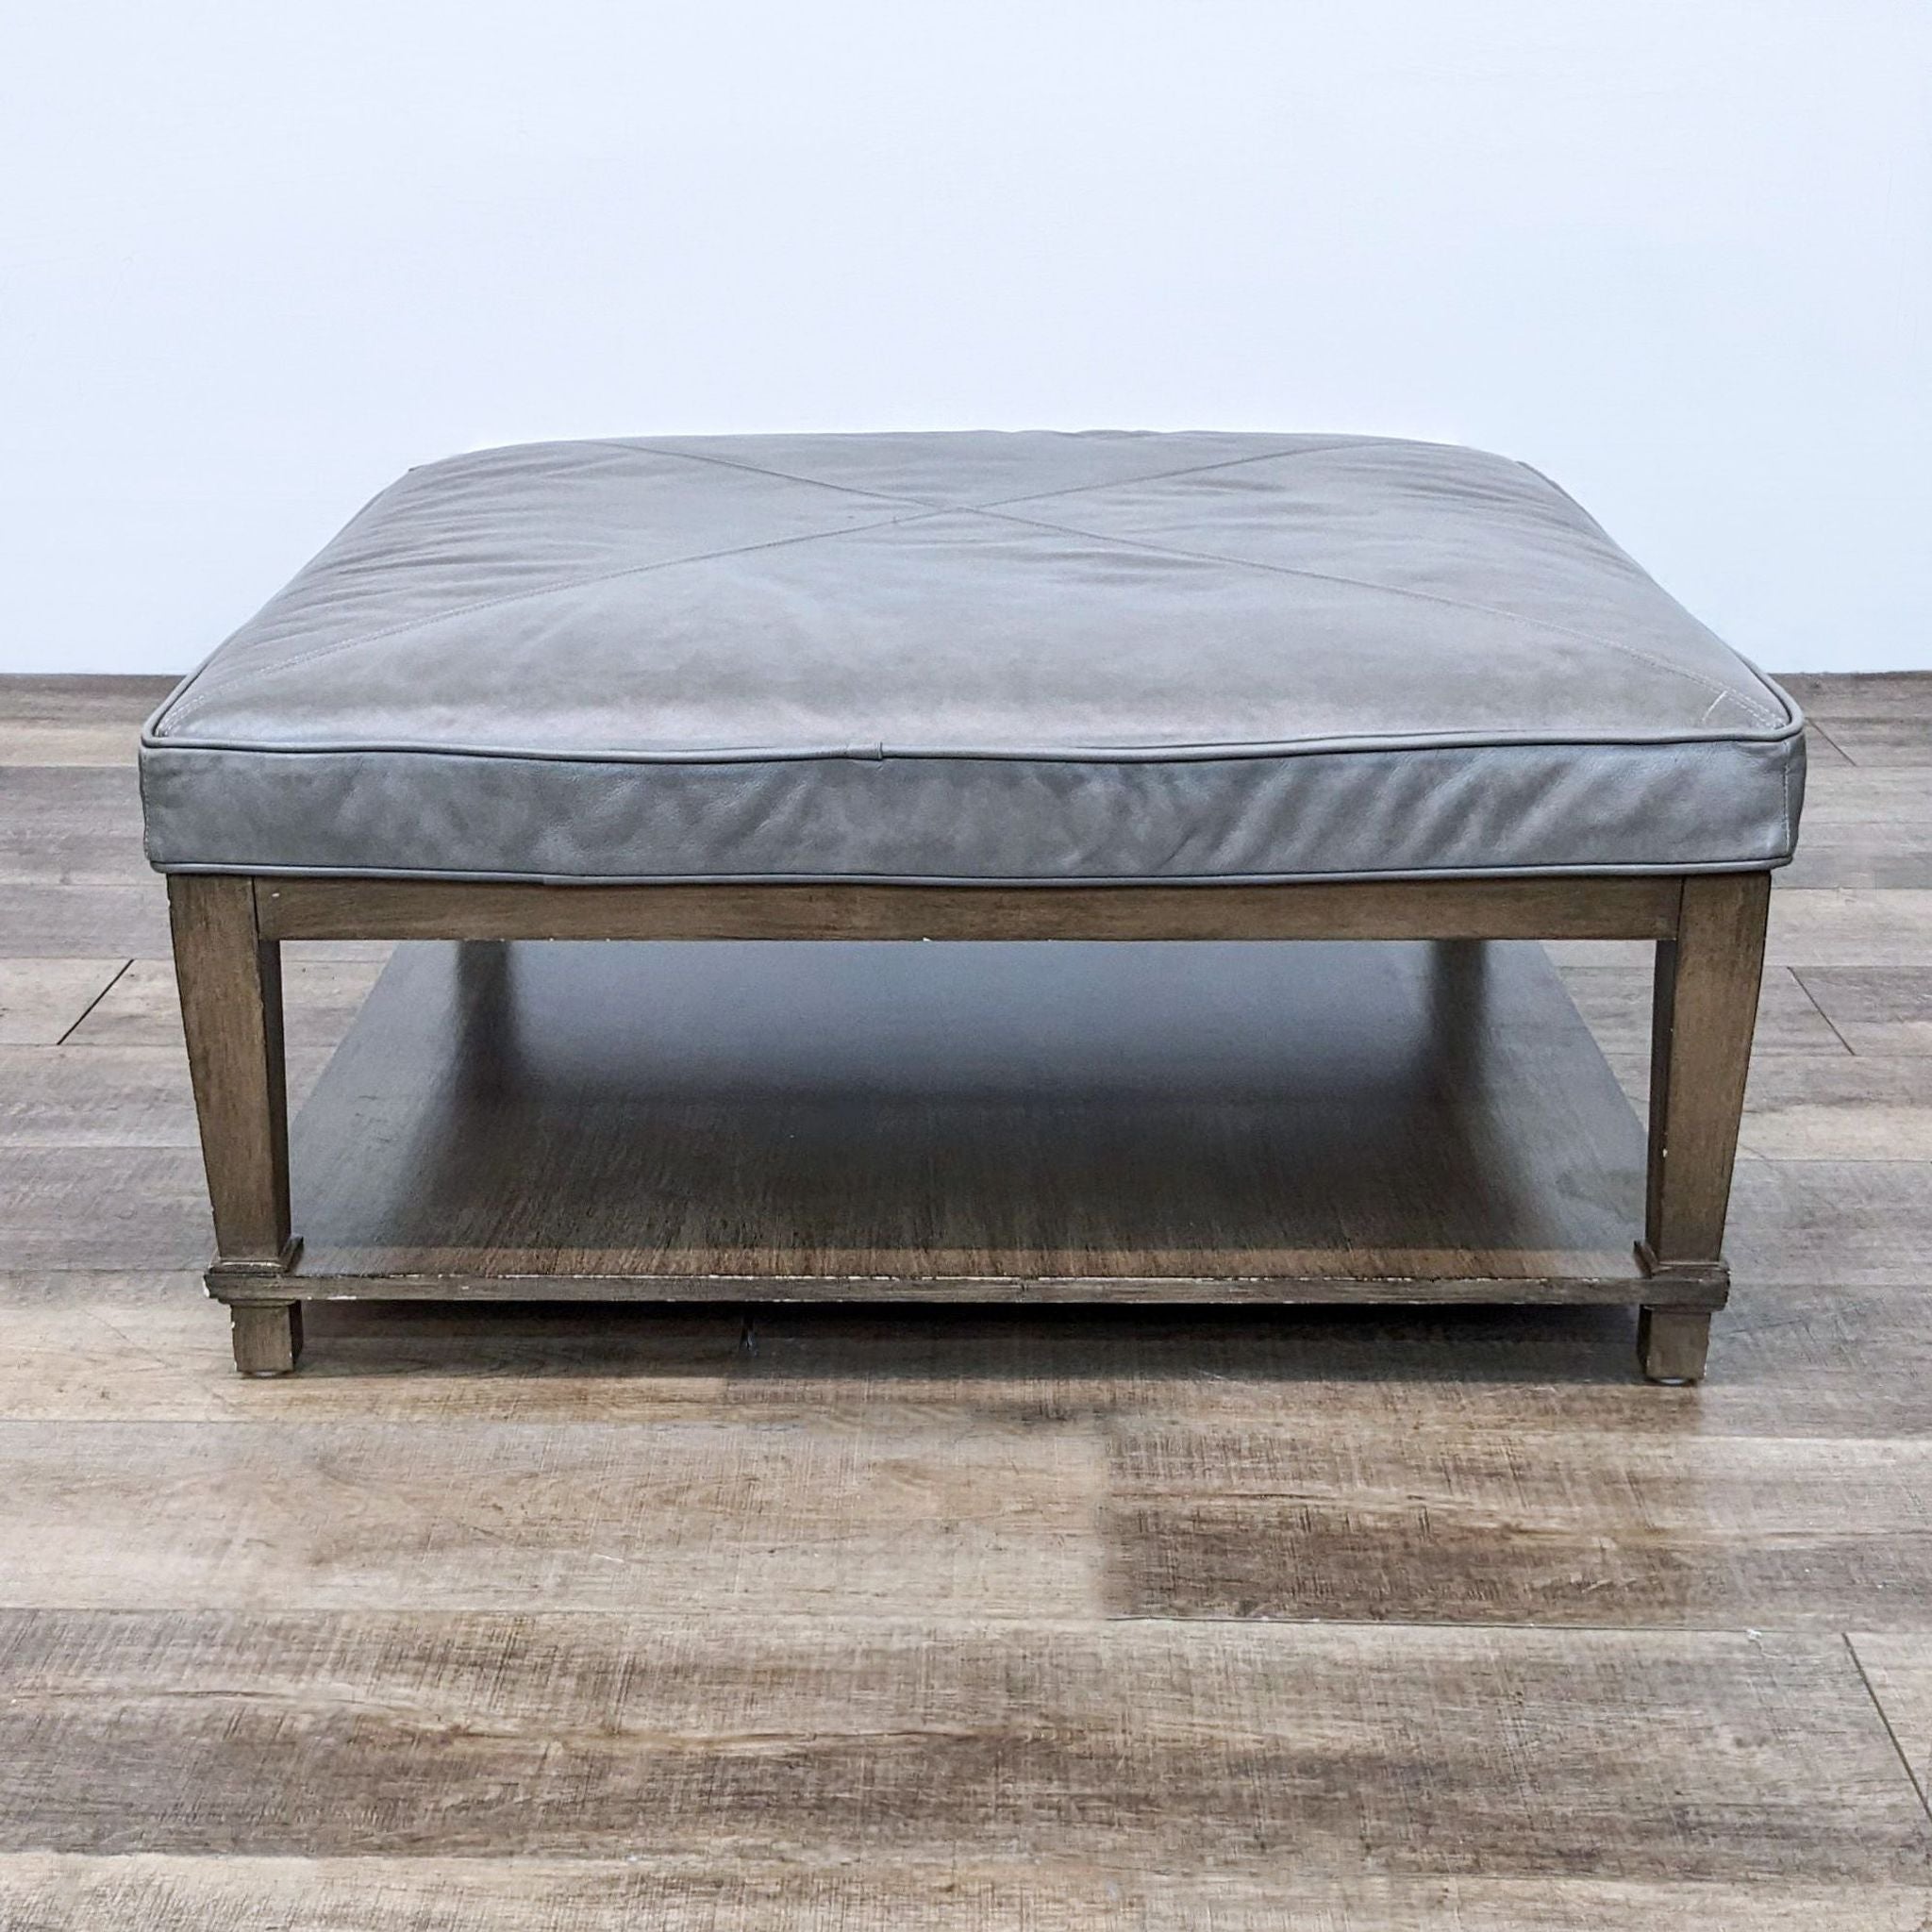 Bassett 40" square gray leather ottoman with wooden frame and lower shelf.